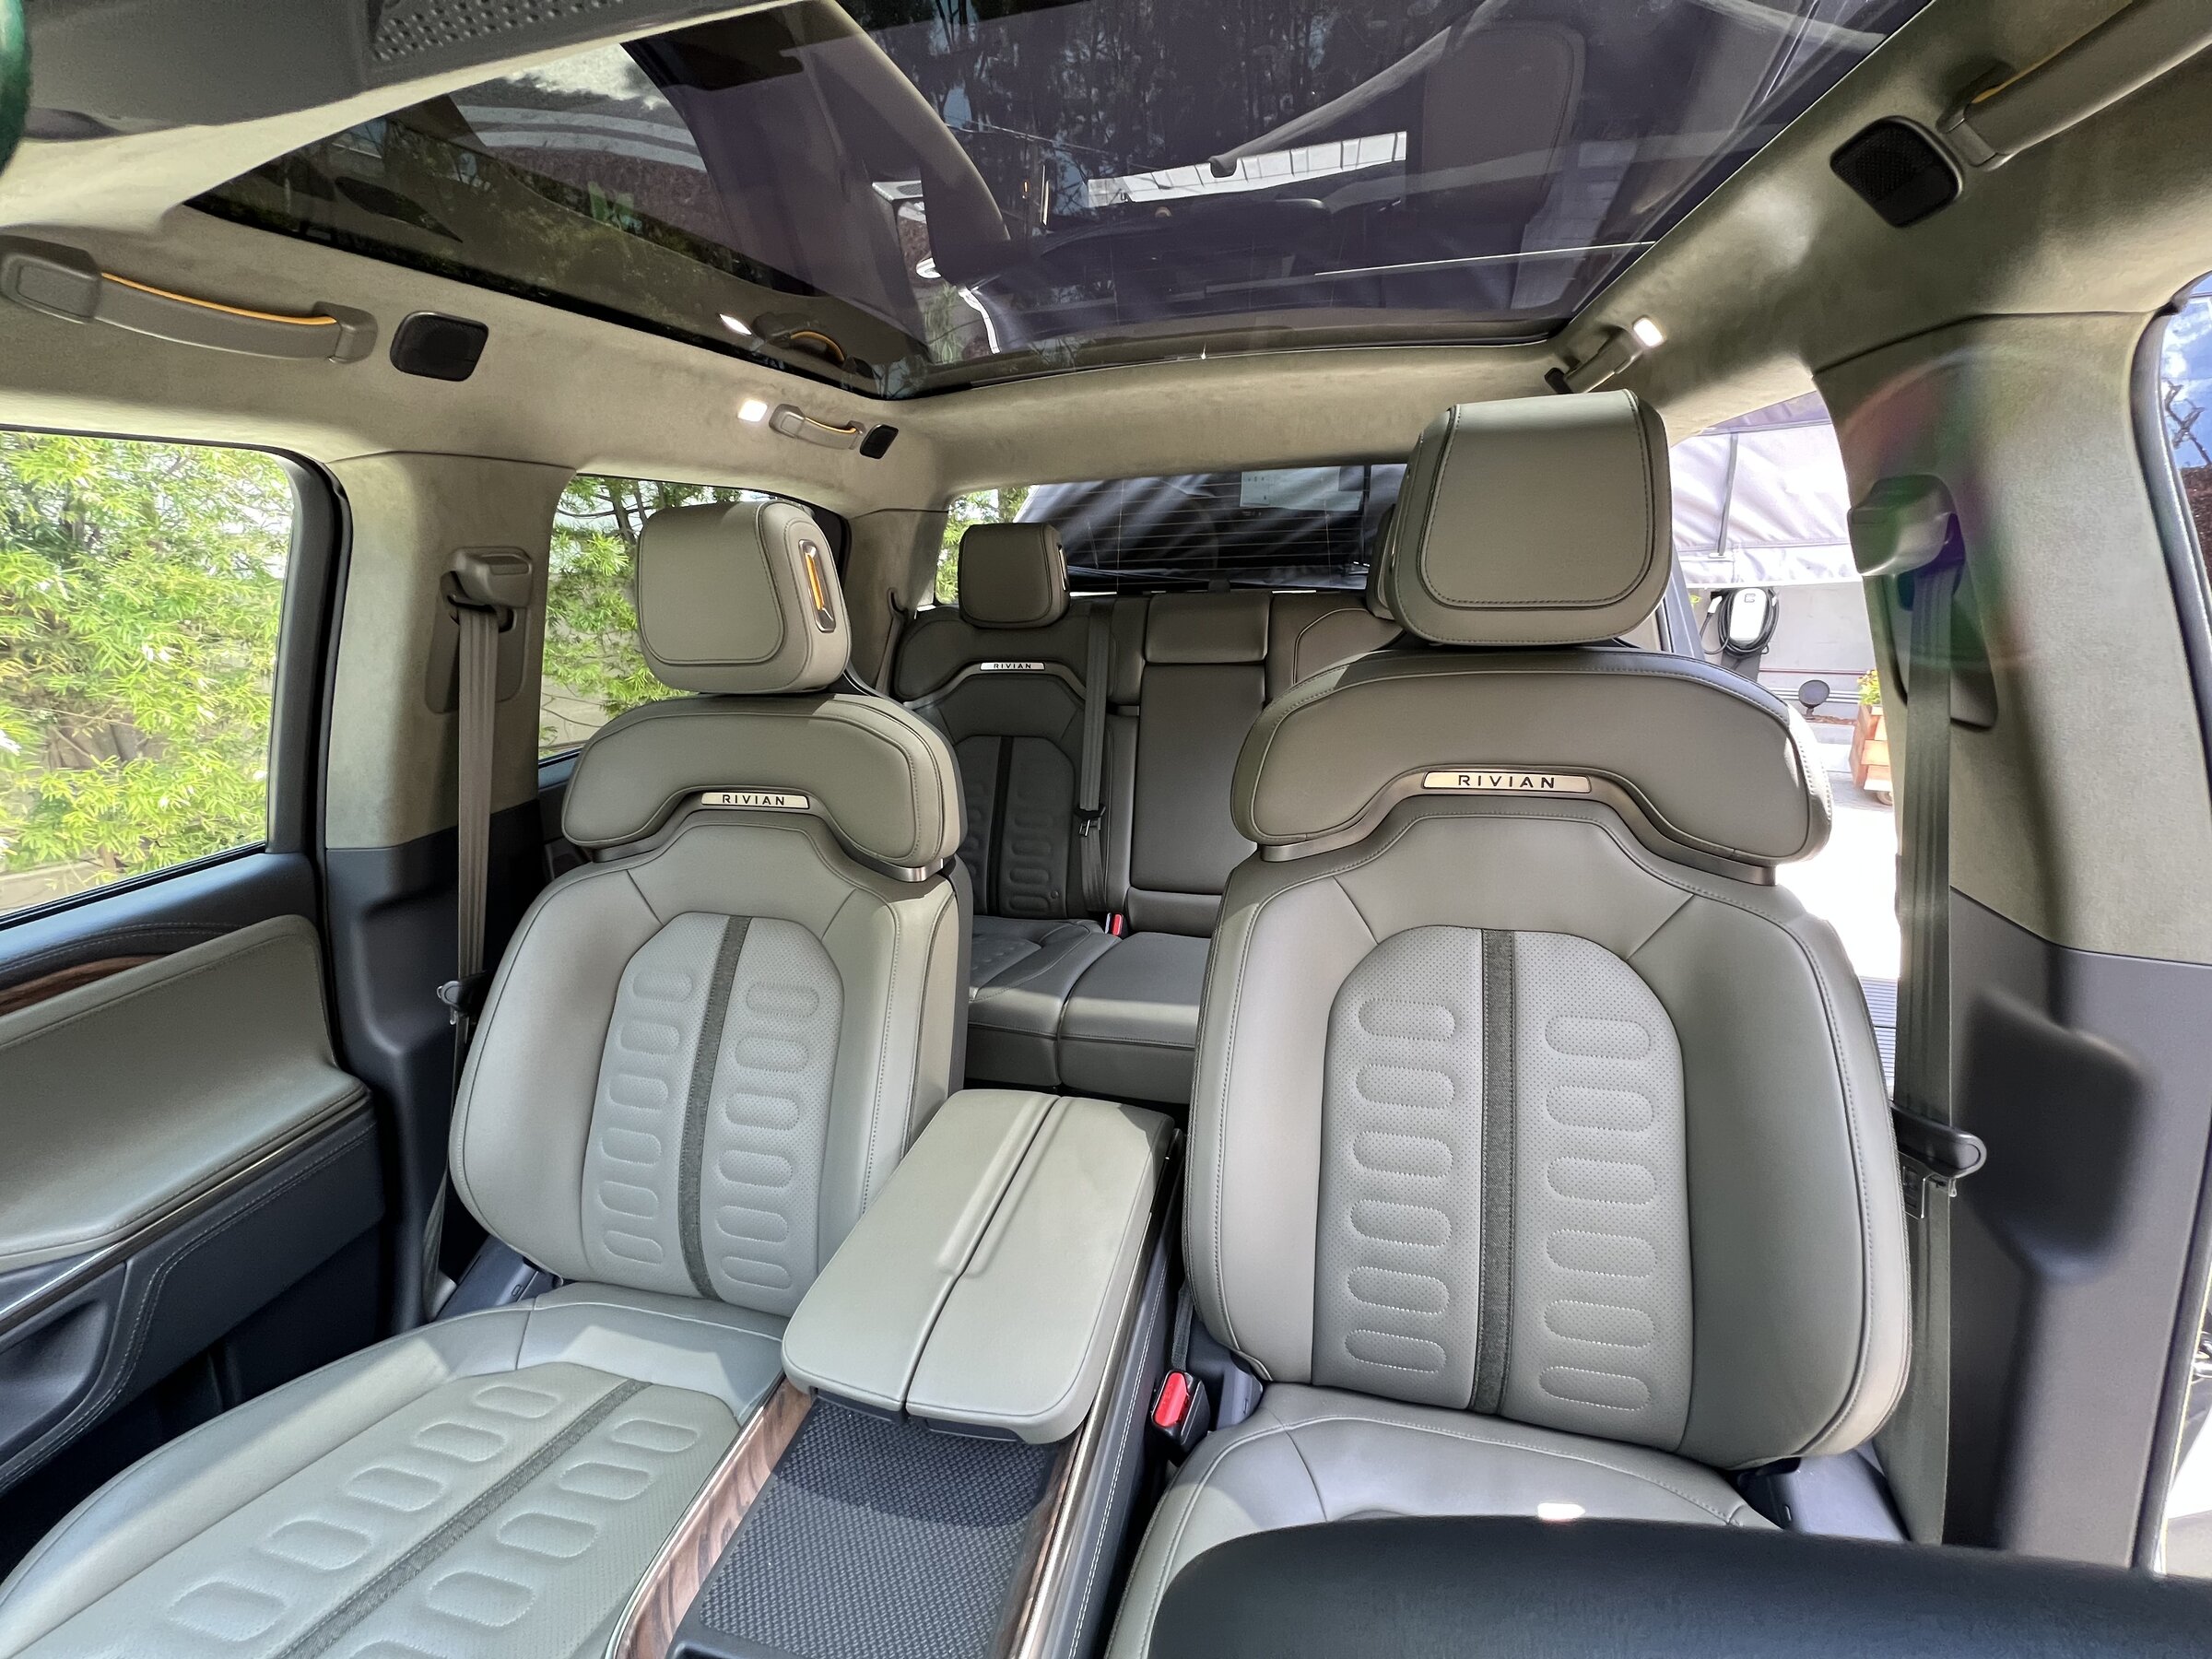 Rivian R1T R1S Forest Edge interior + other photos from Rivian Venice Hub IMG_1985